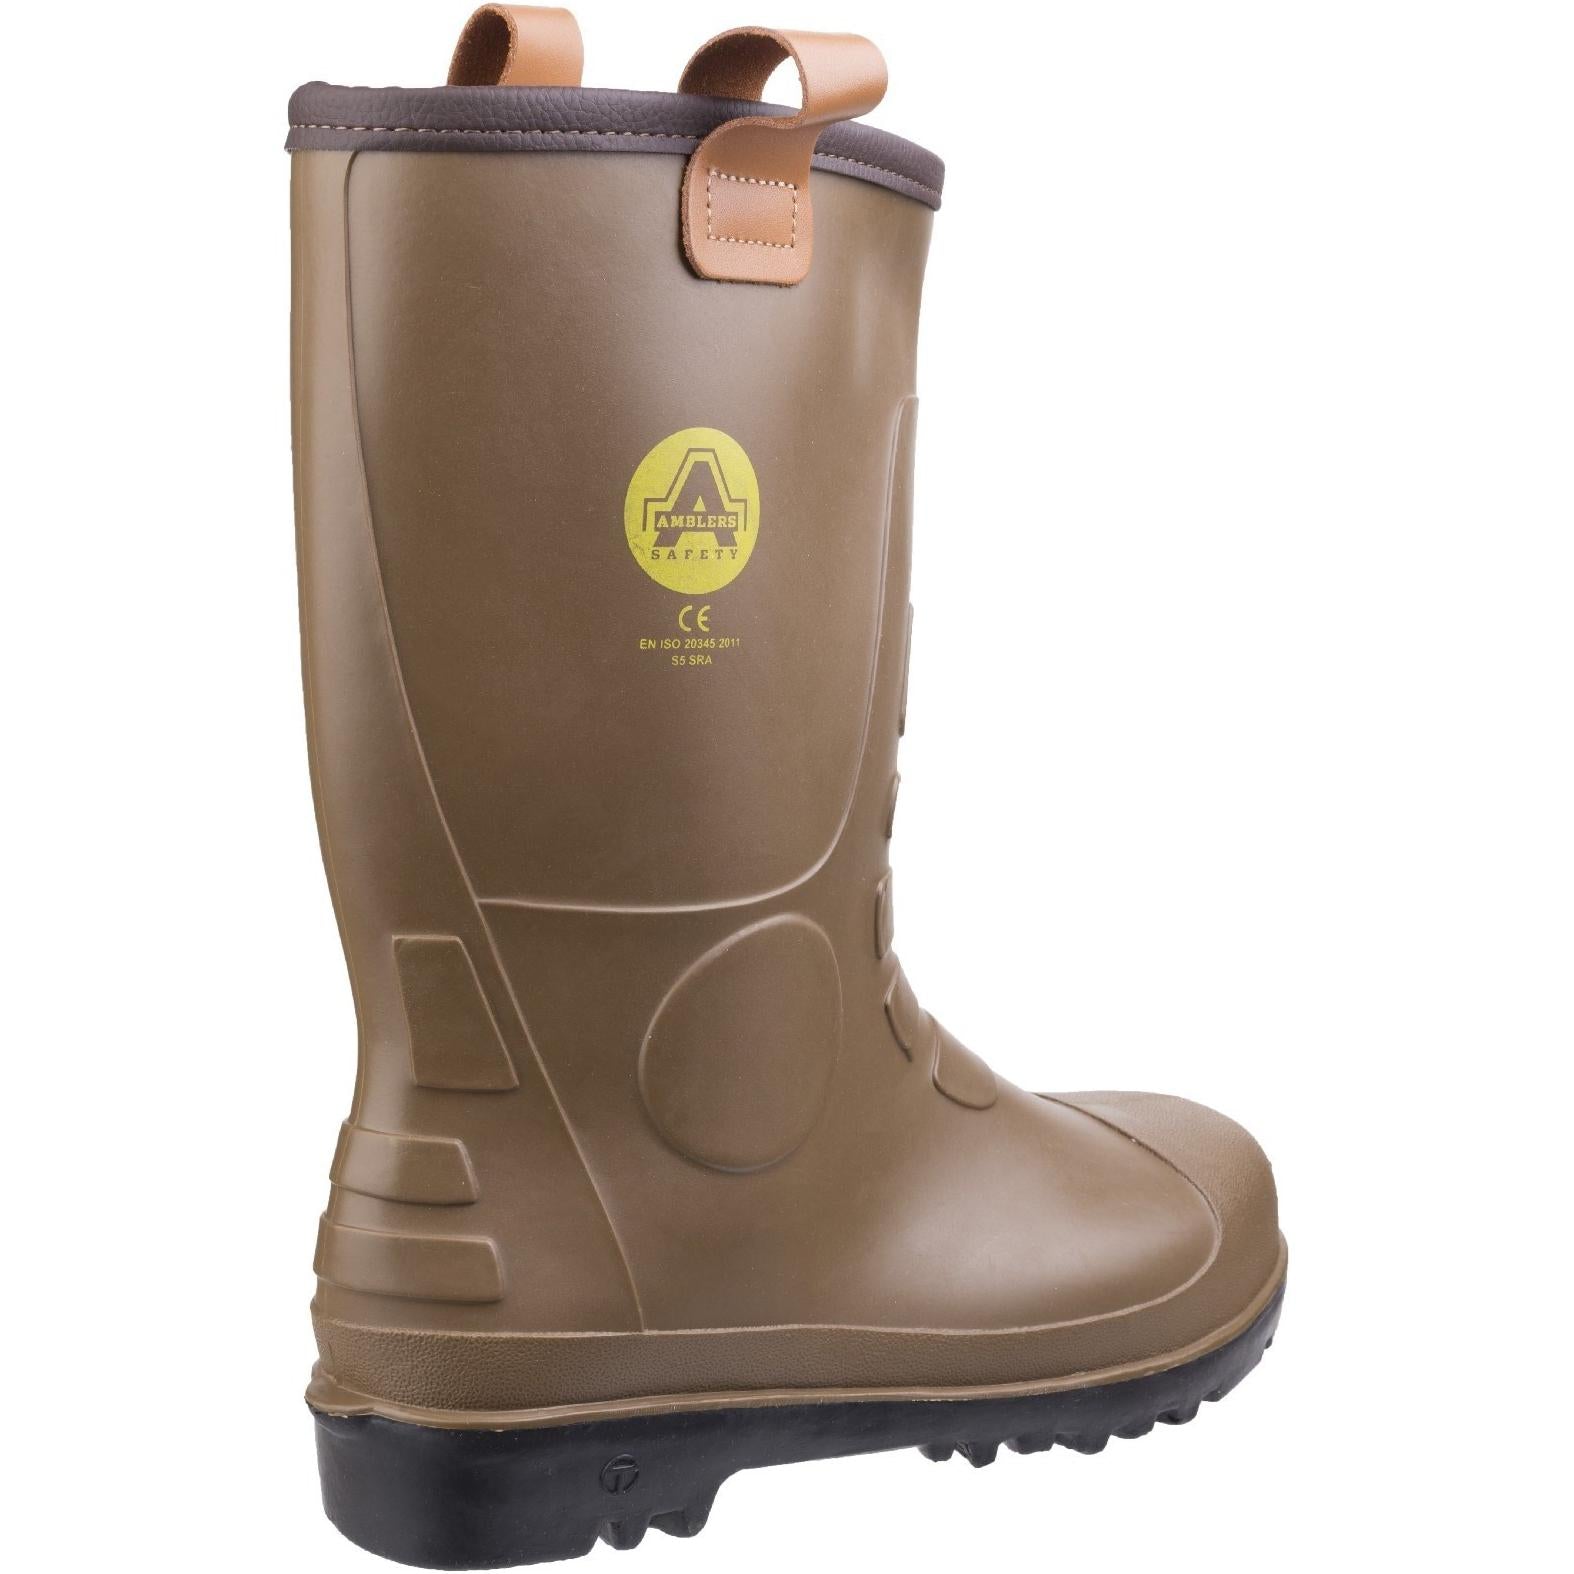 Amblers Safety FS95 Waterproof PVC Pull on Safety Rigger Boot